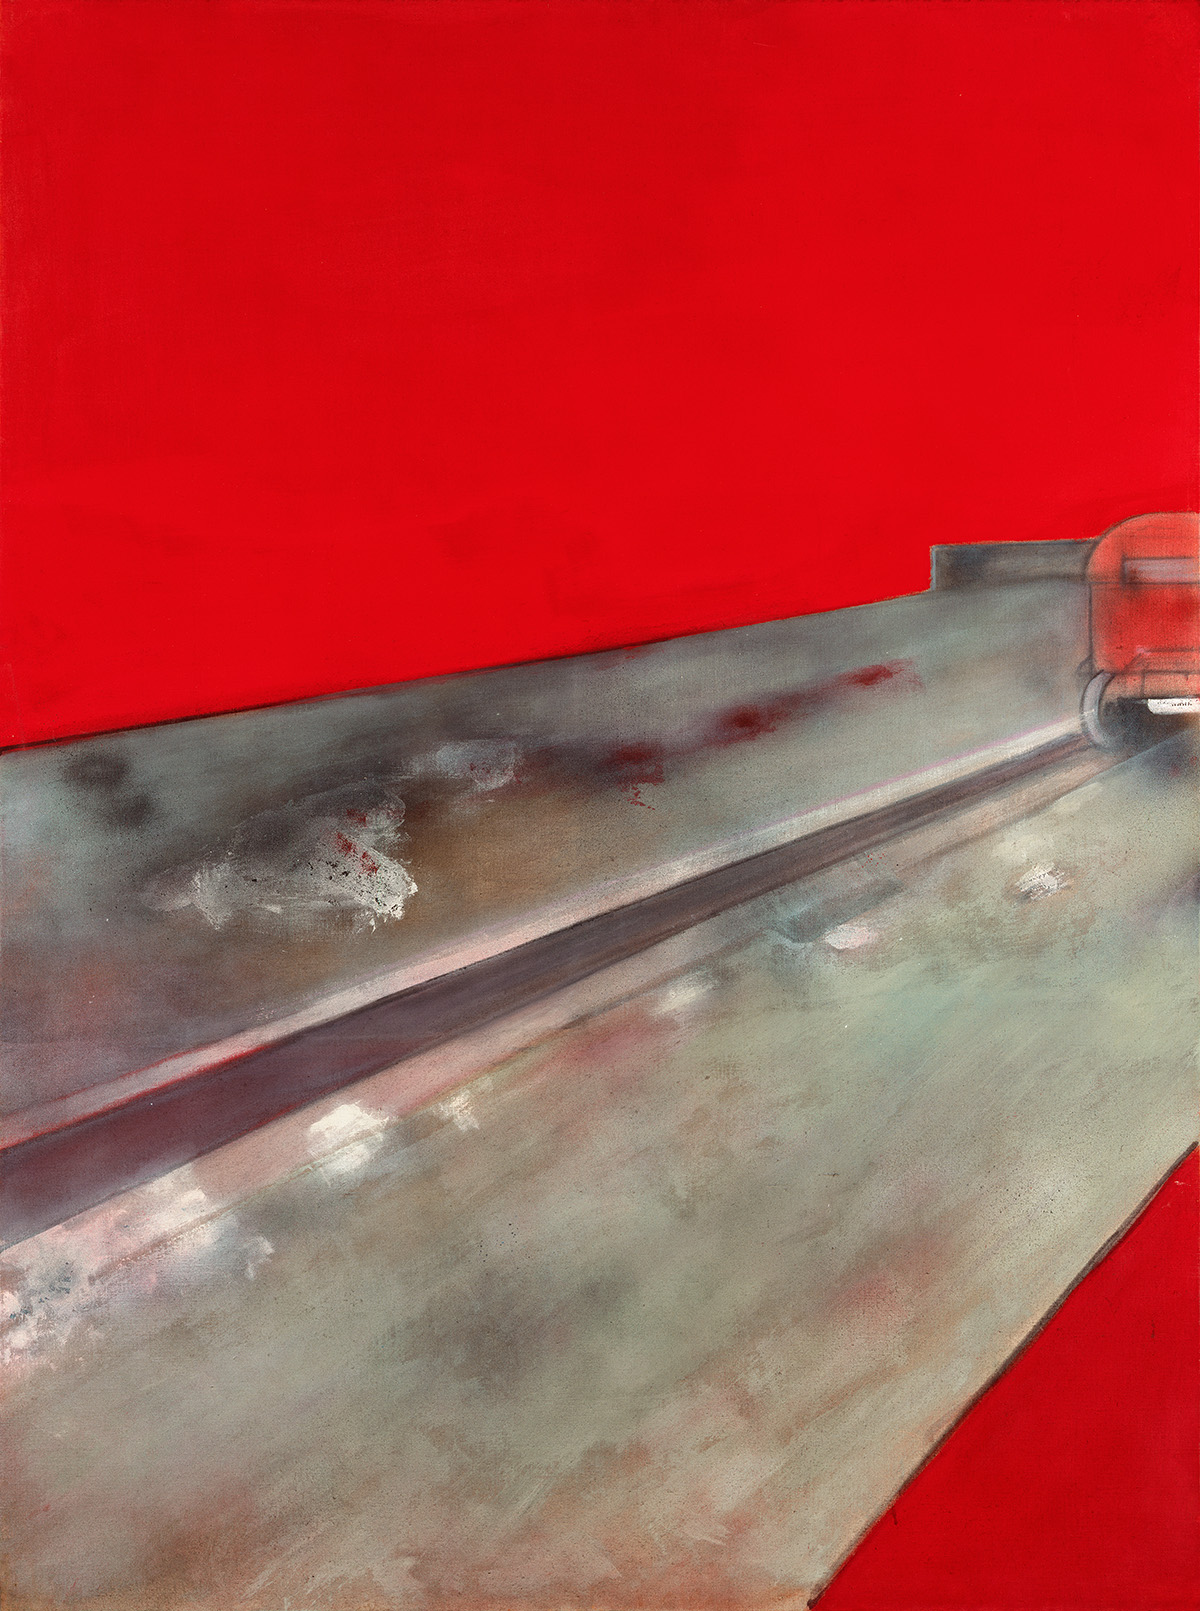 ‘Street Scene (with Car in Distance)’, 1984. Oil on canvas. CR no. 84-03. © The Estate of Francis Bacon / DACS London 2022. All rights reserved.